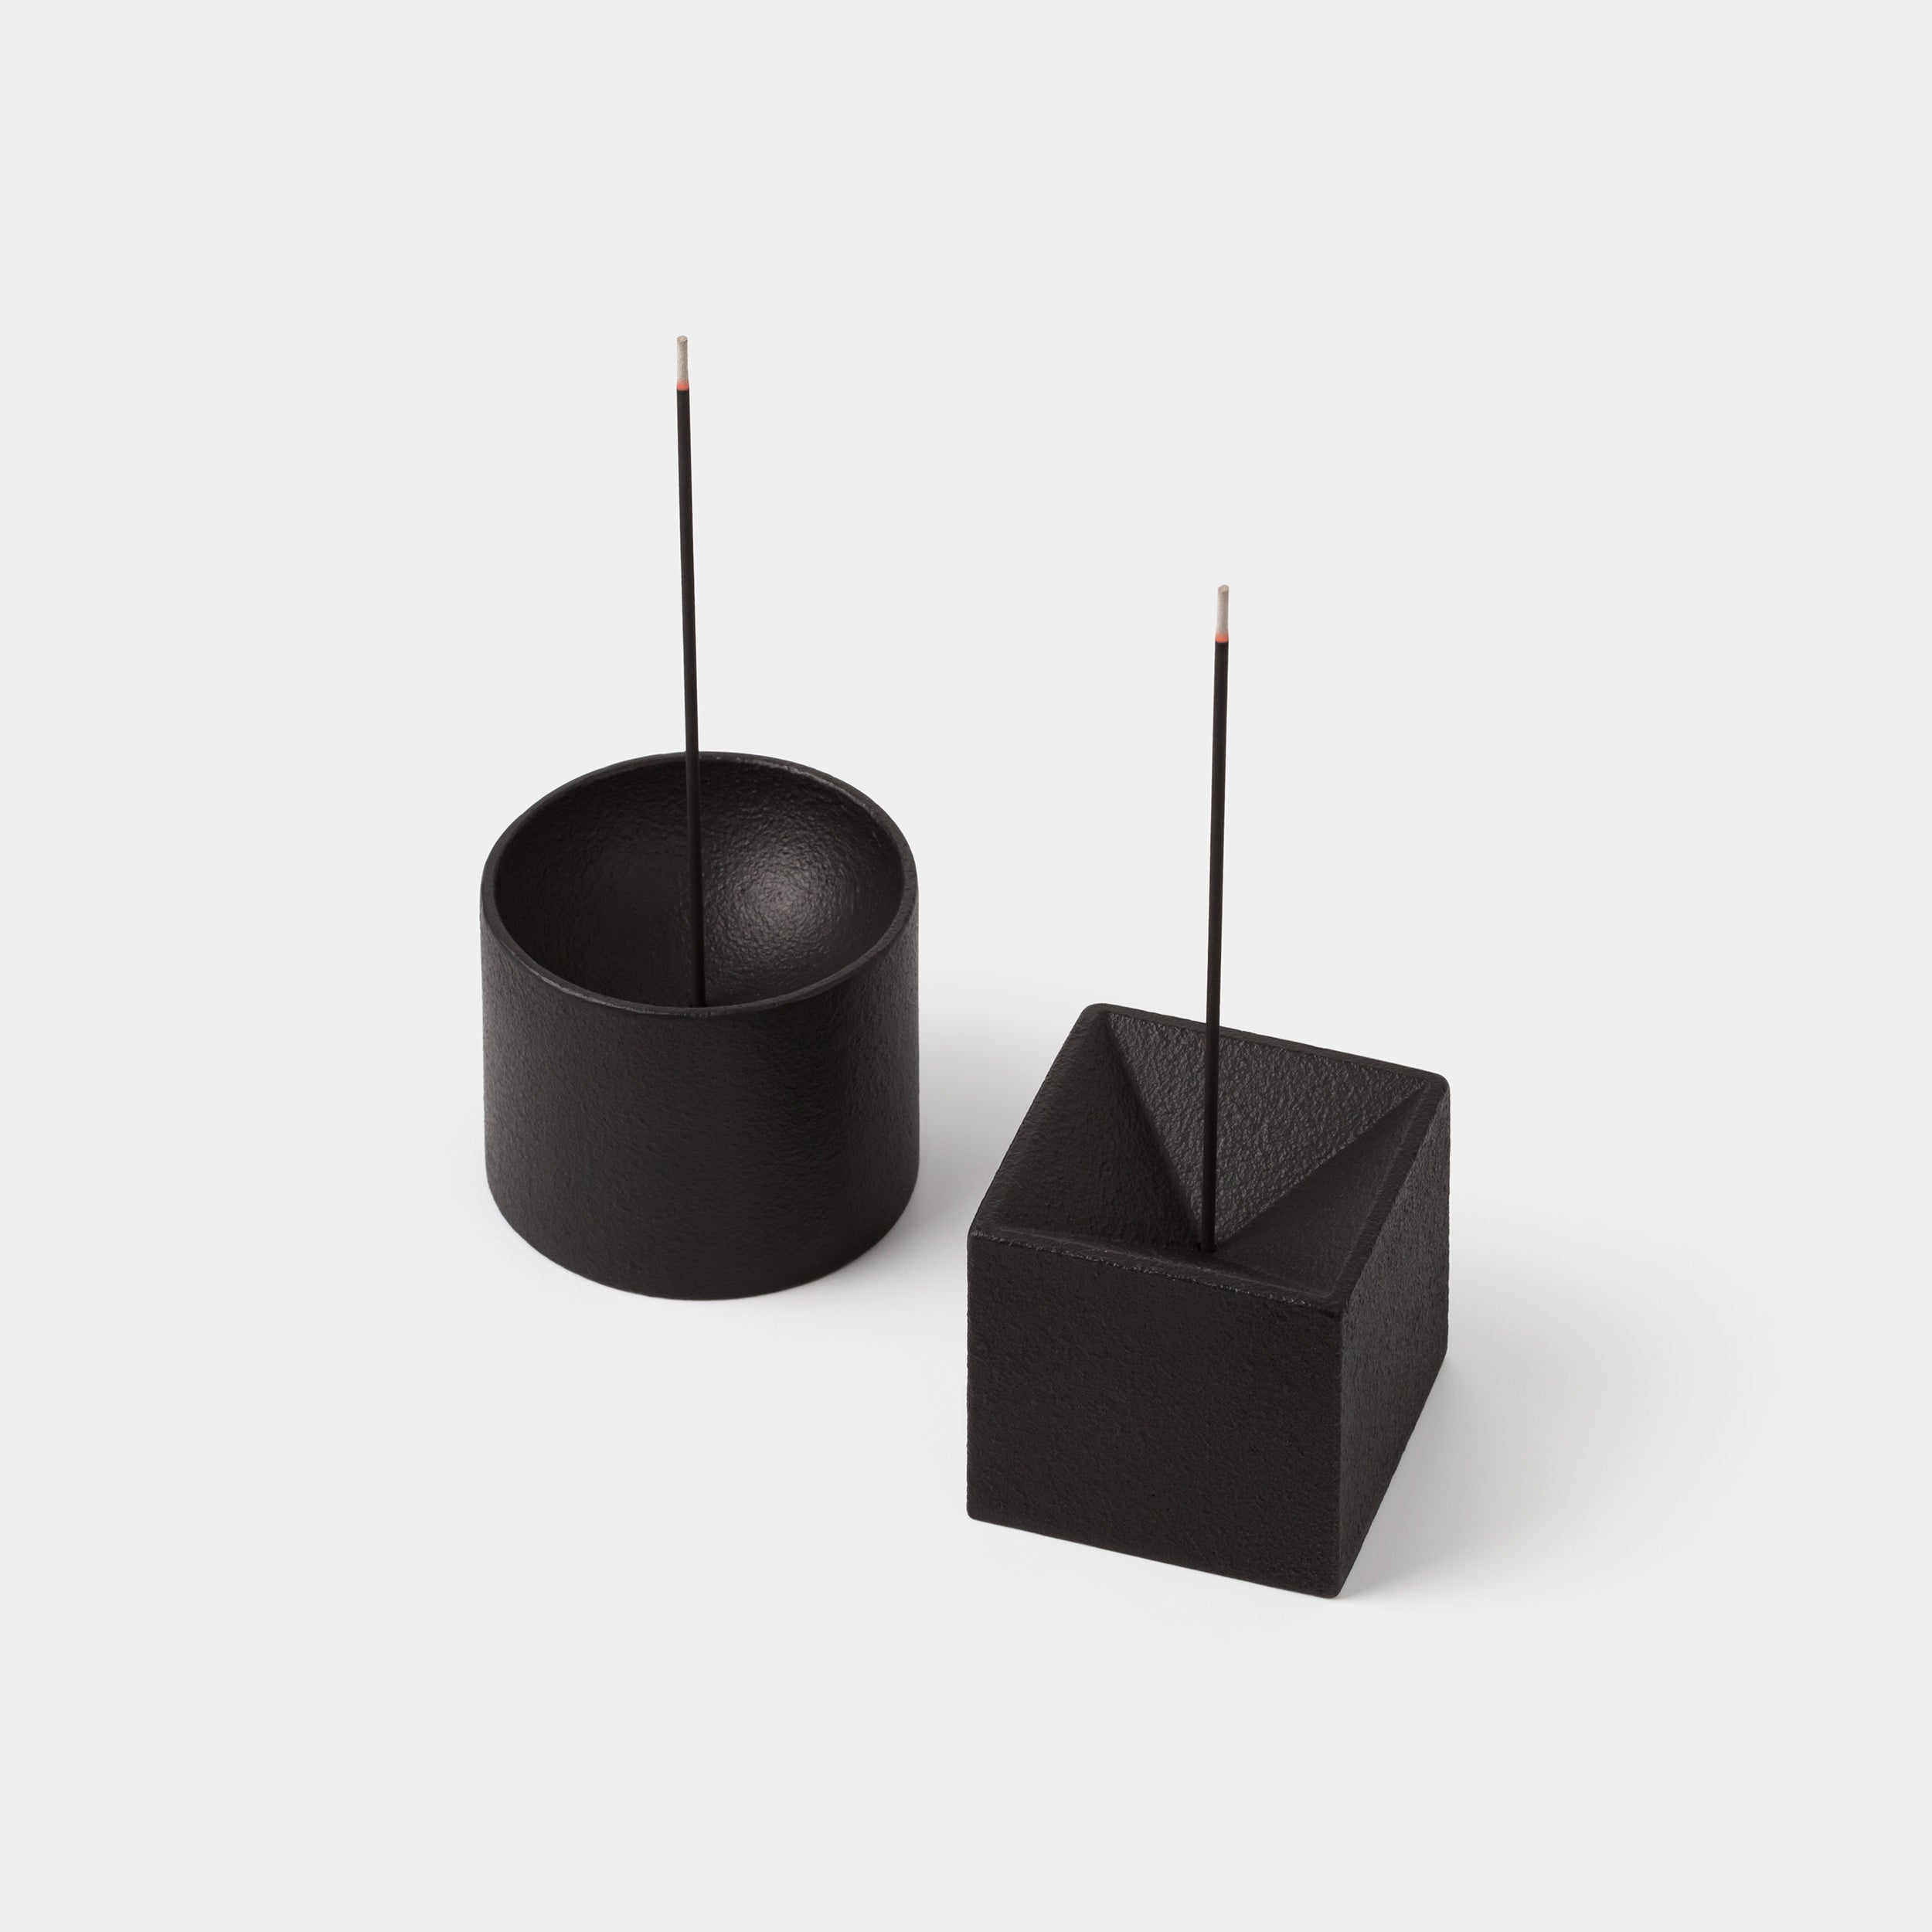 Quolo Incense Holders